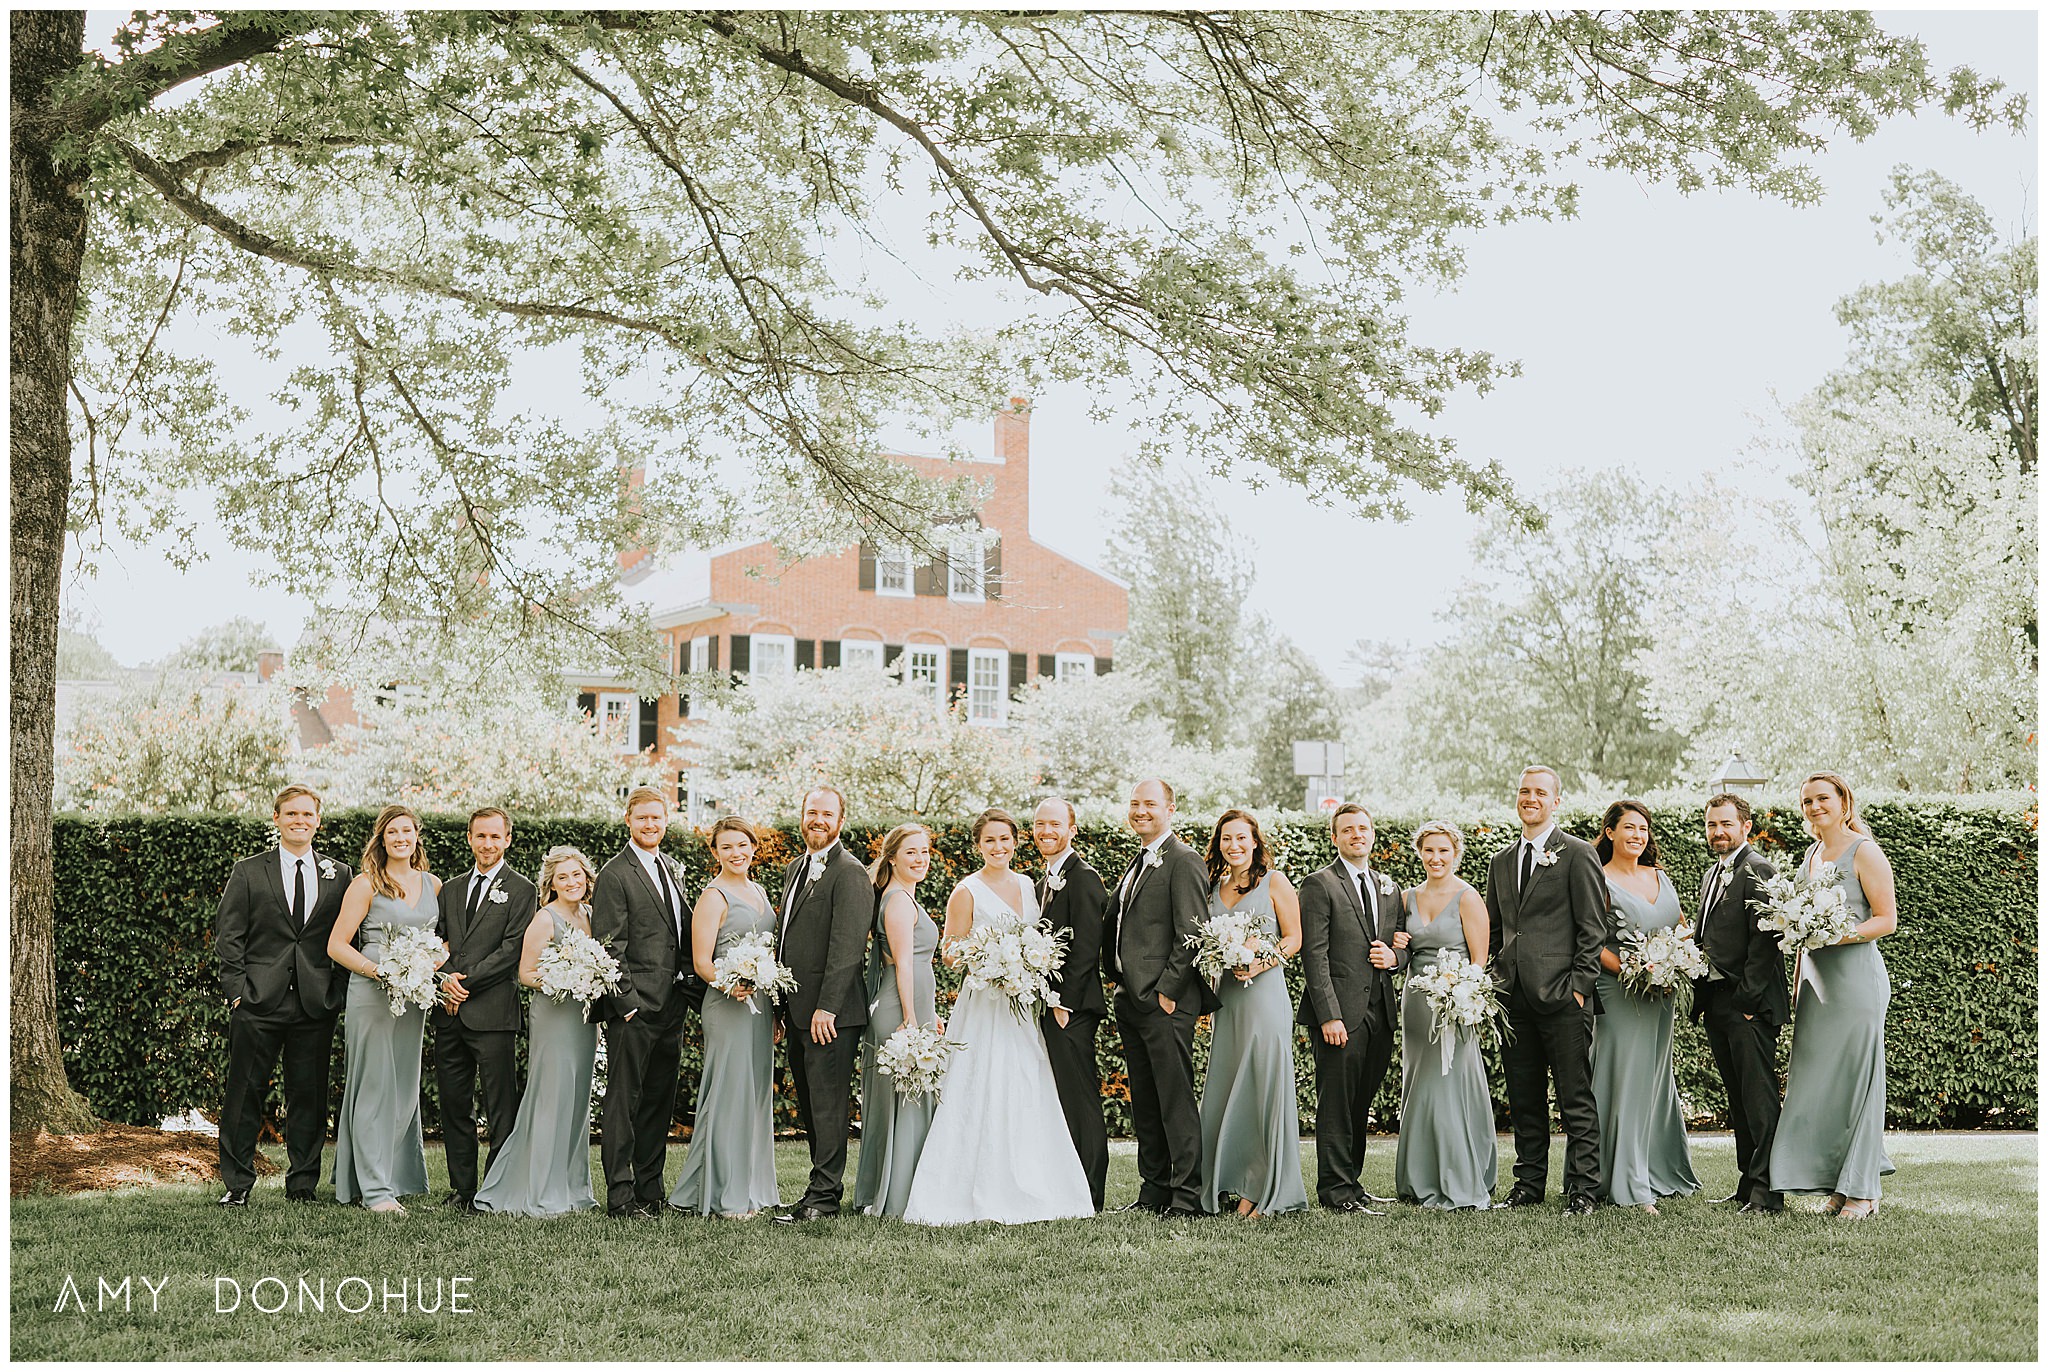 Bridal Party photos on the front lawn at The Woodstock Inn & Resort in Woodstock, Vermont